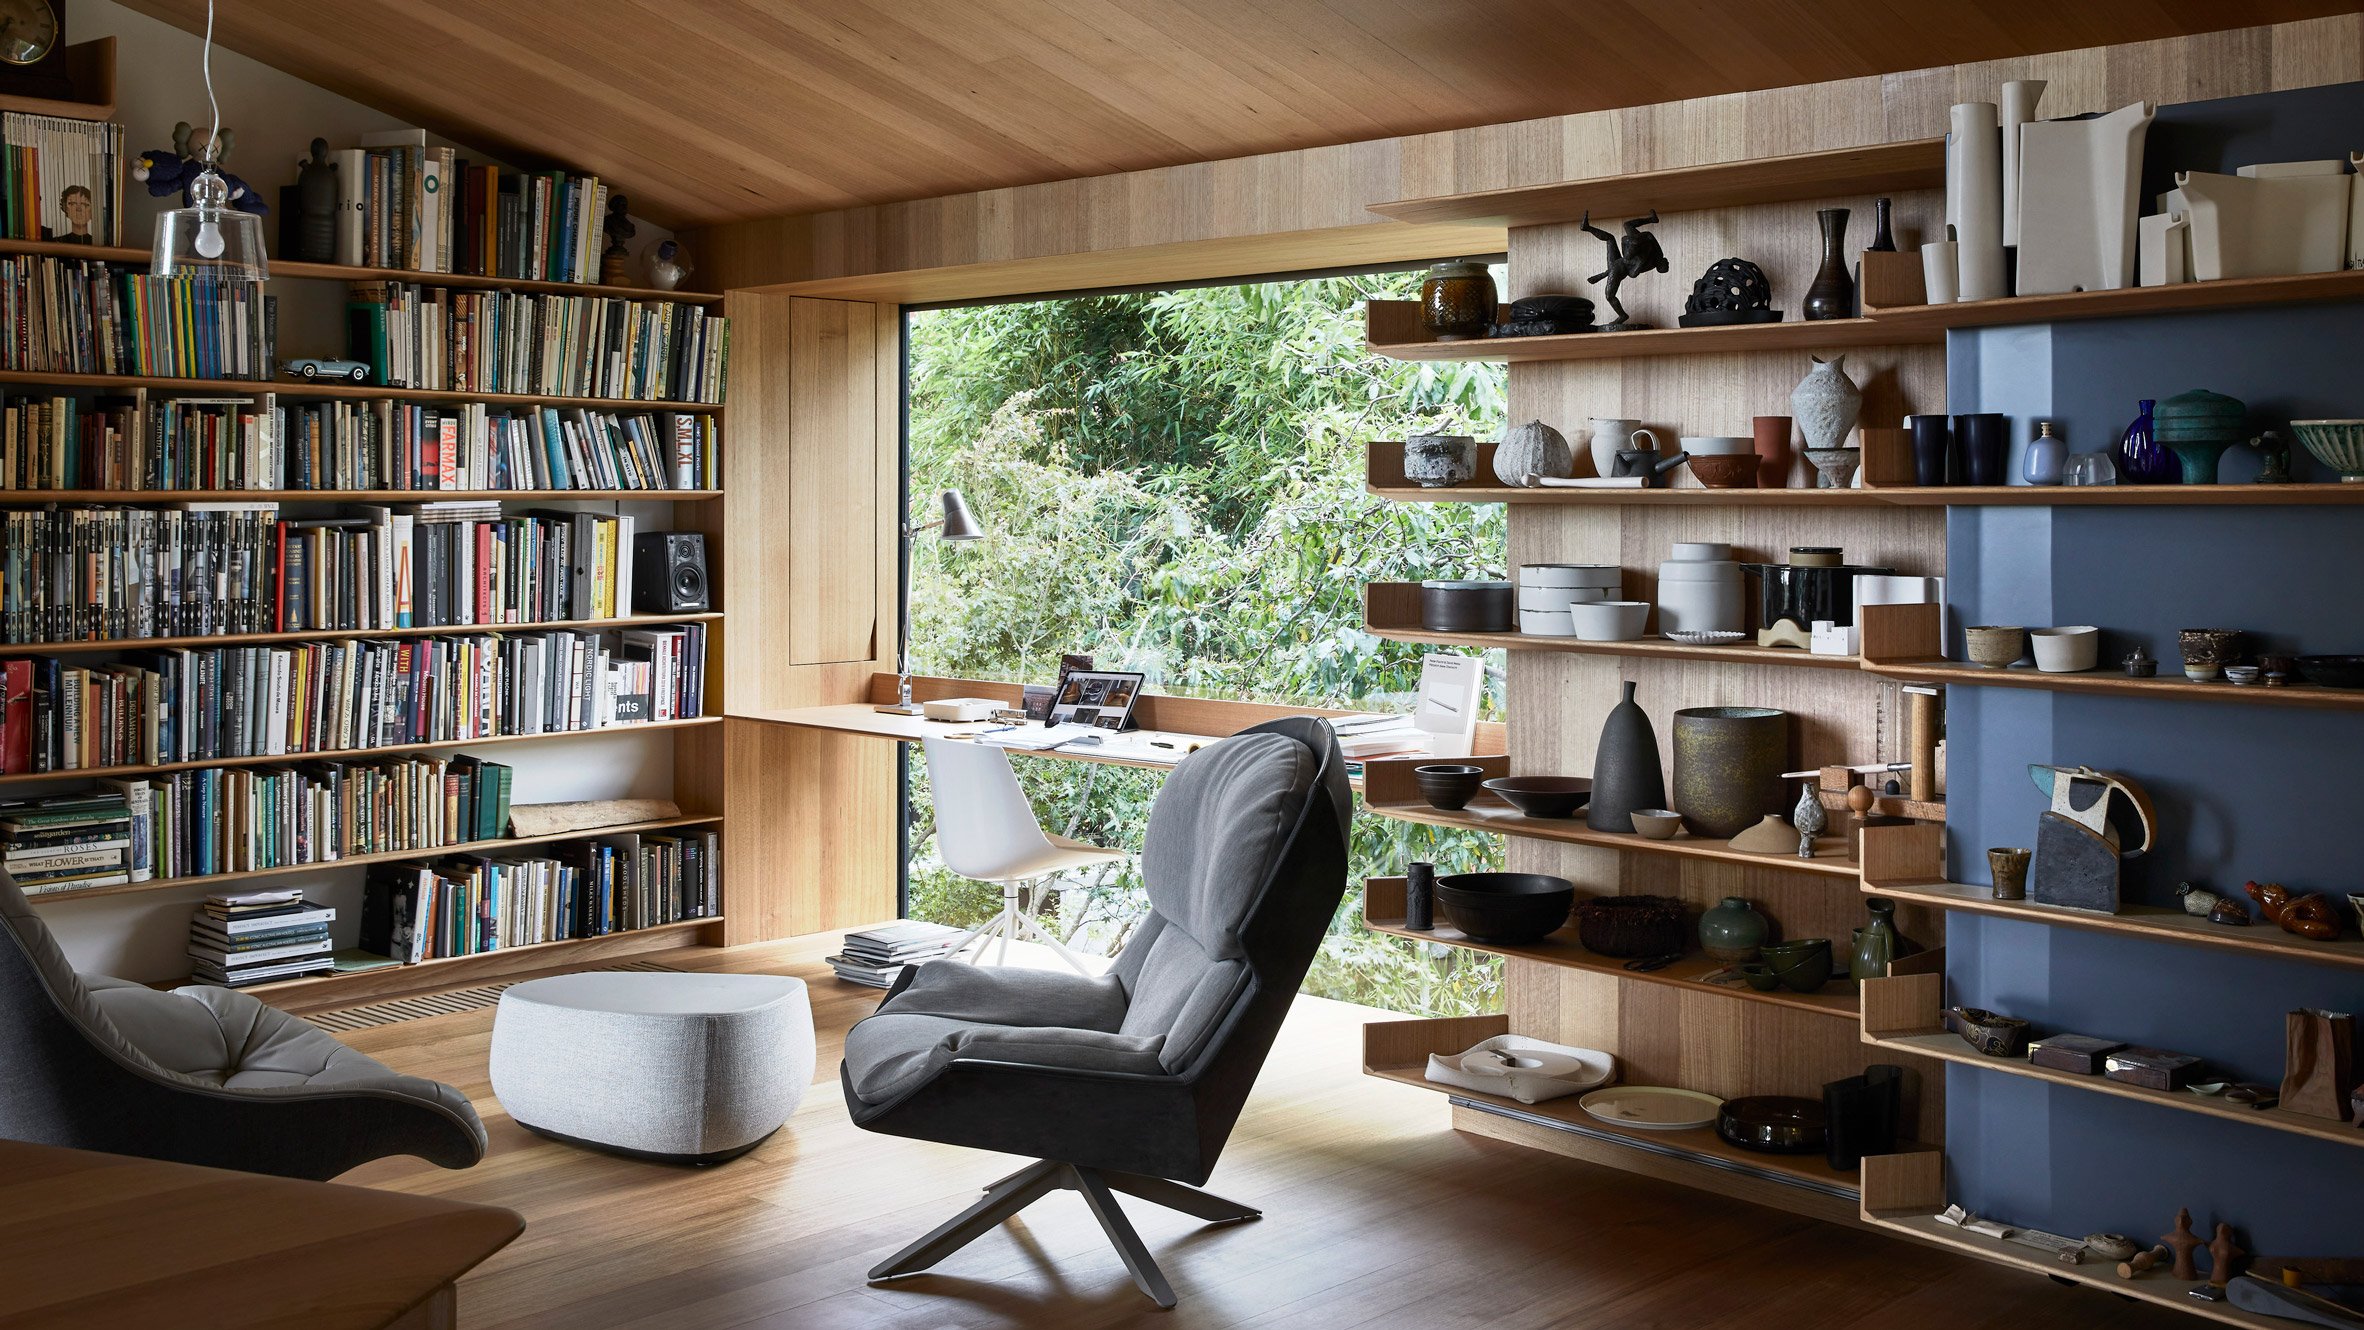 Study lined with wood in Kew Residence by John Wardle Architects in Melbourne, Australia